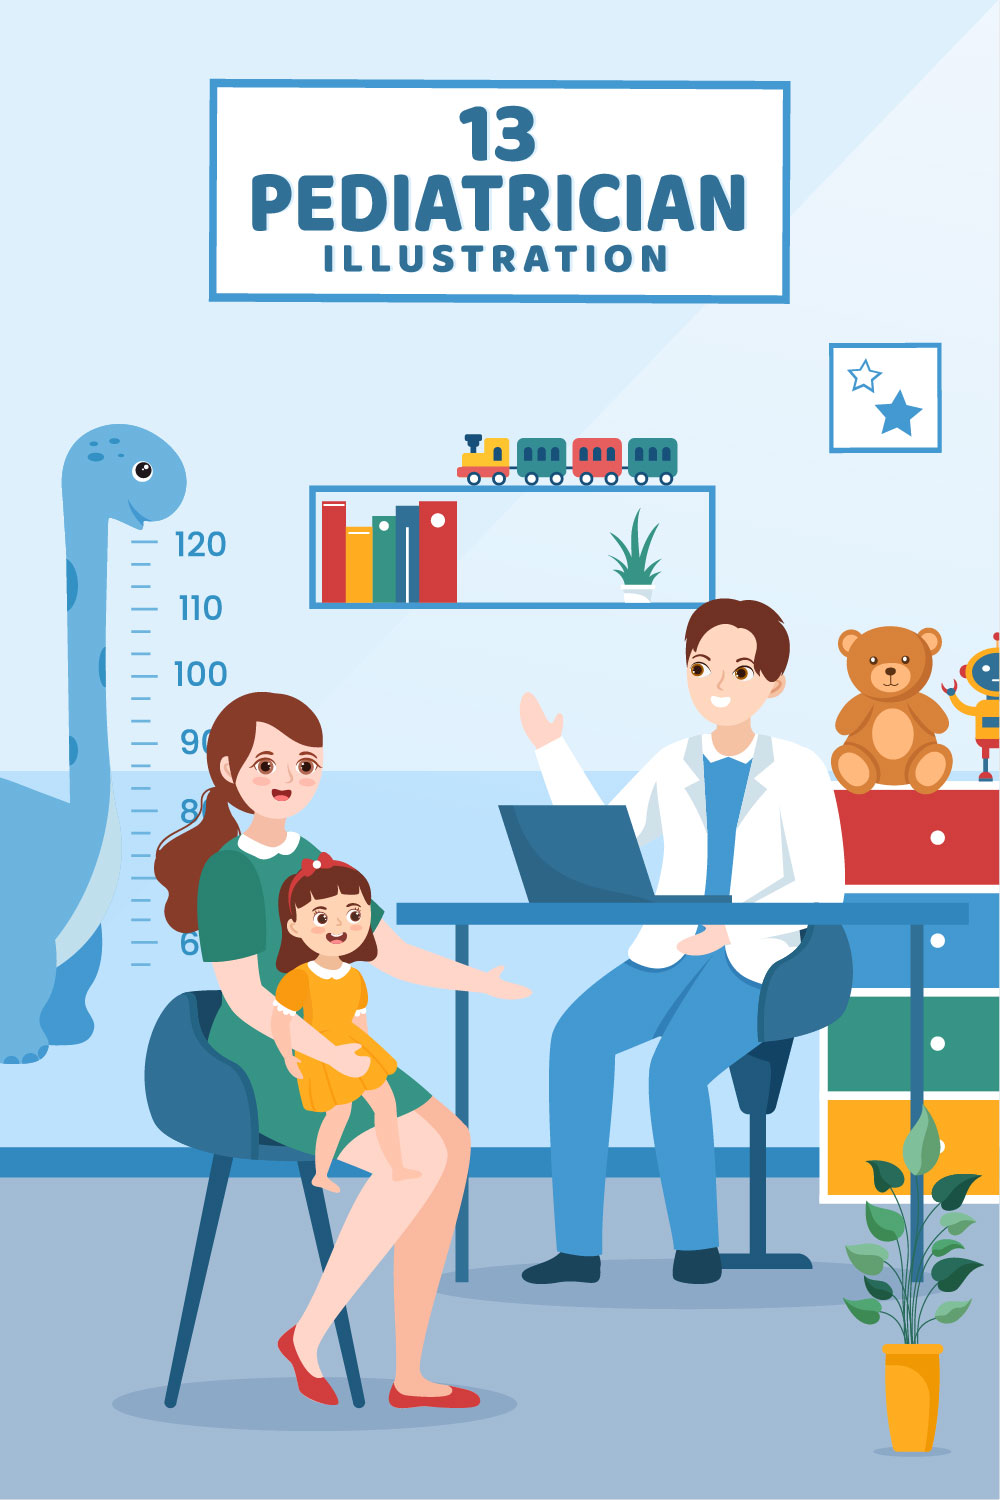 Pediatrician and Baby Graphics Design pinterest image.